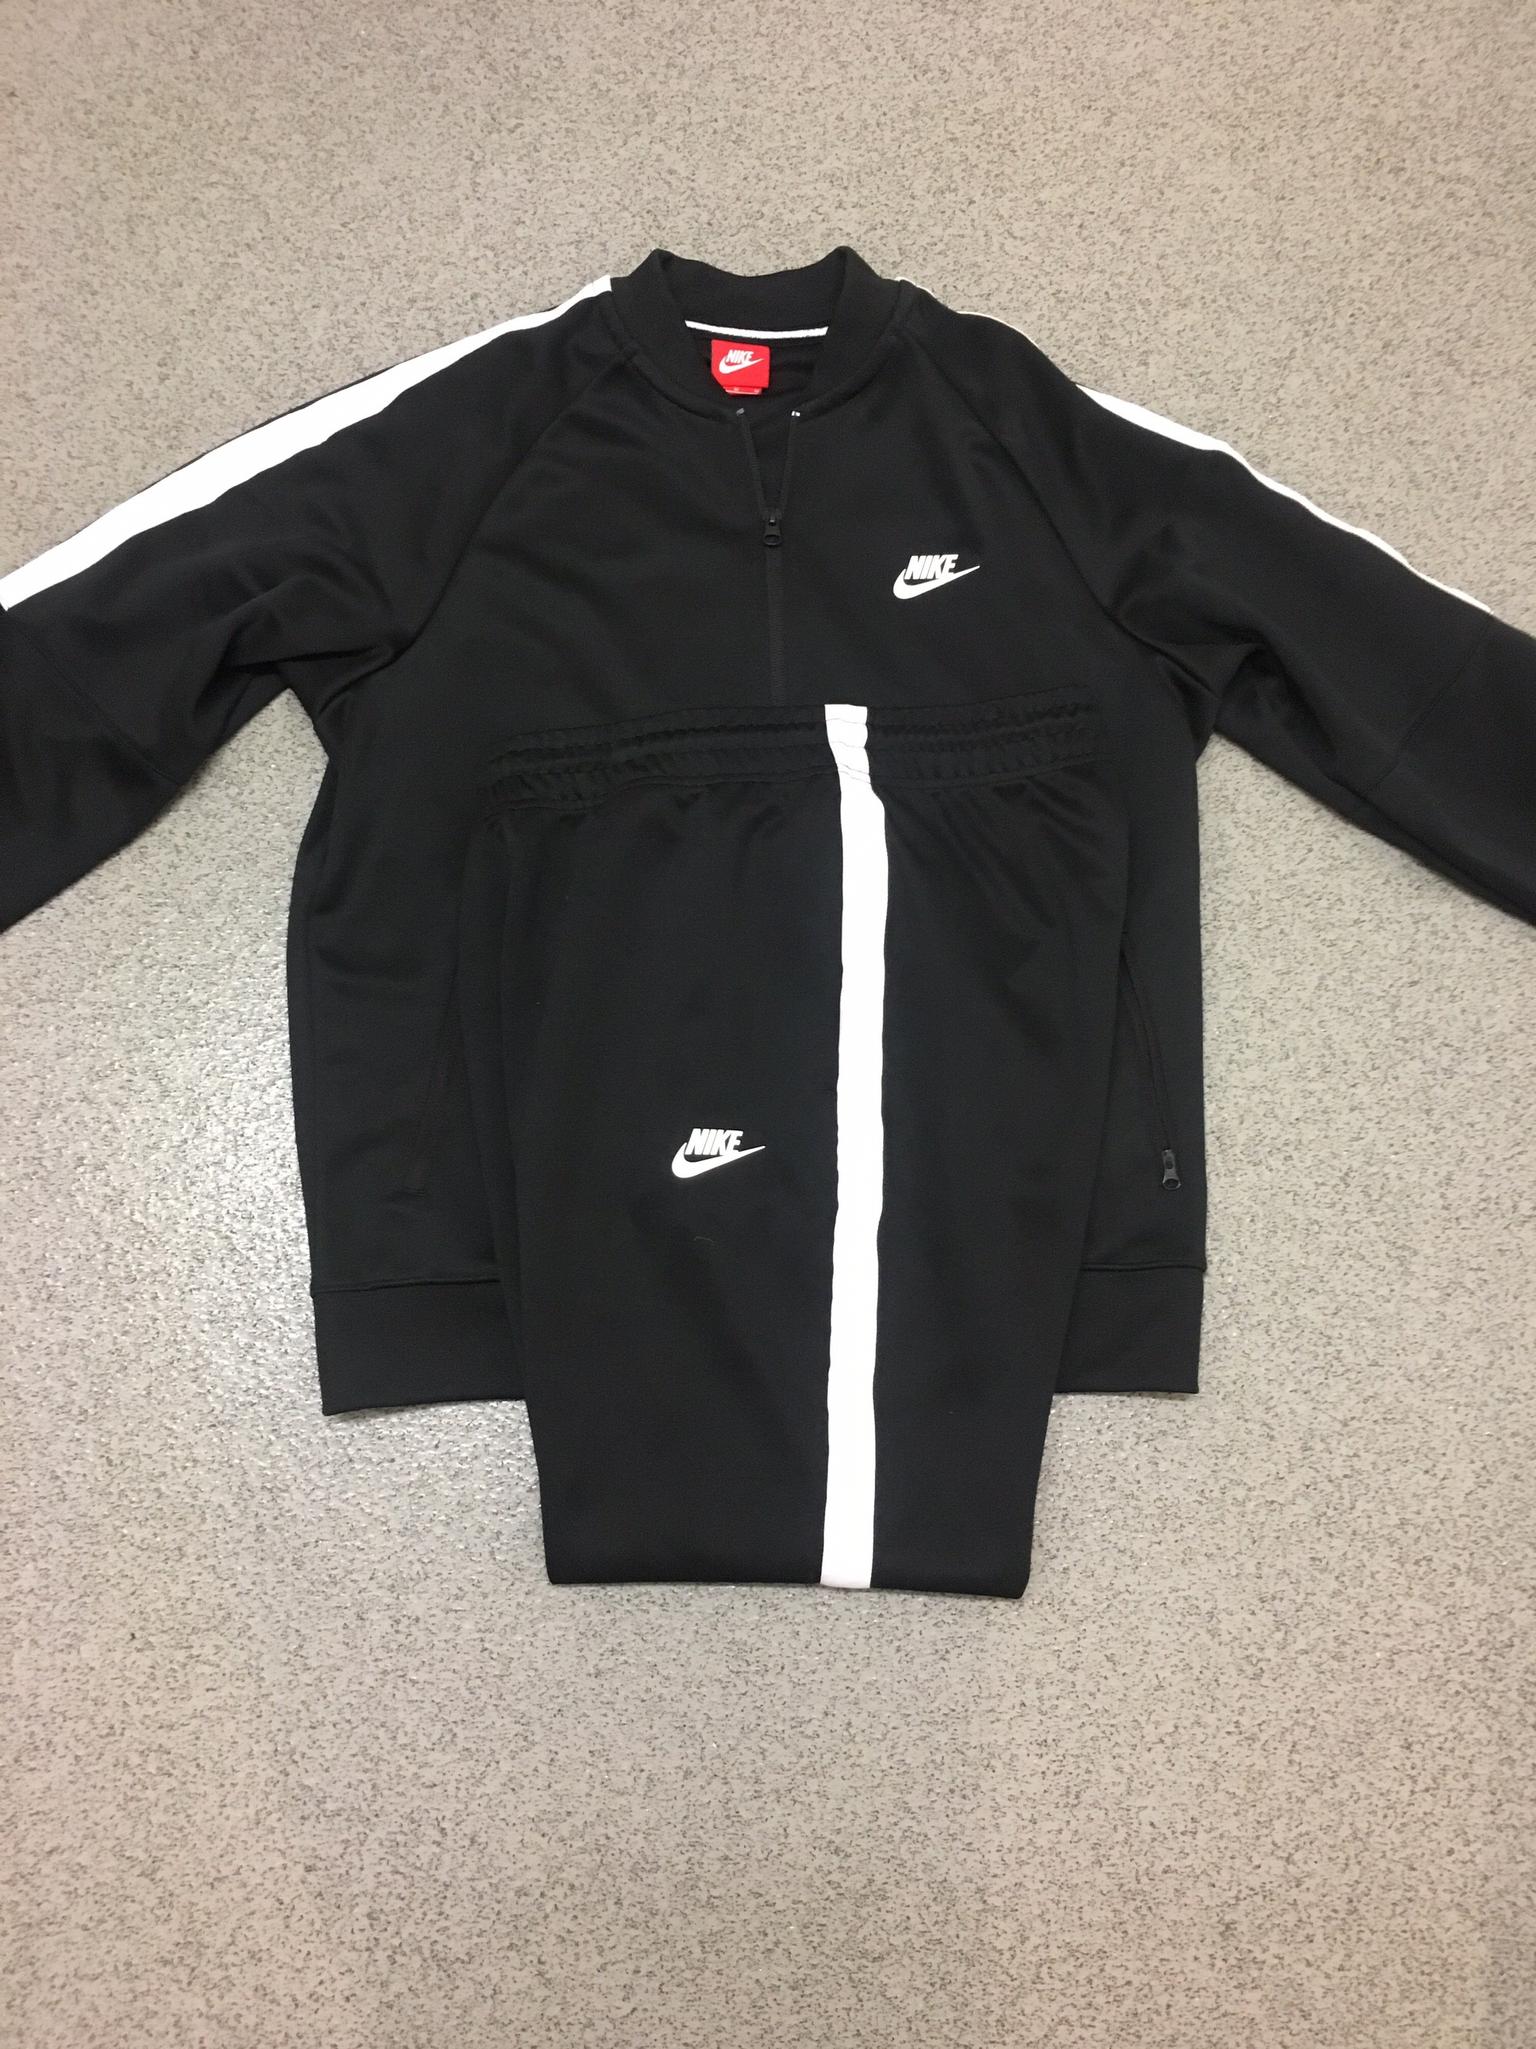 nike tracksuit mens black and white